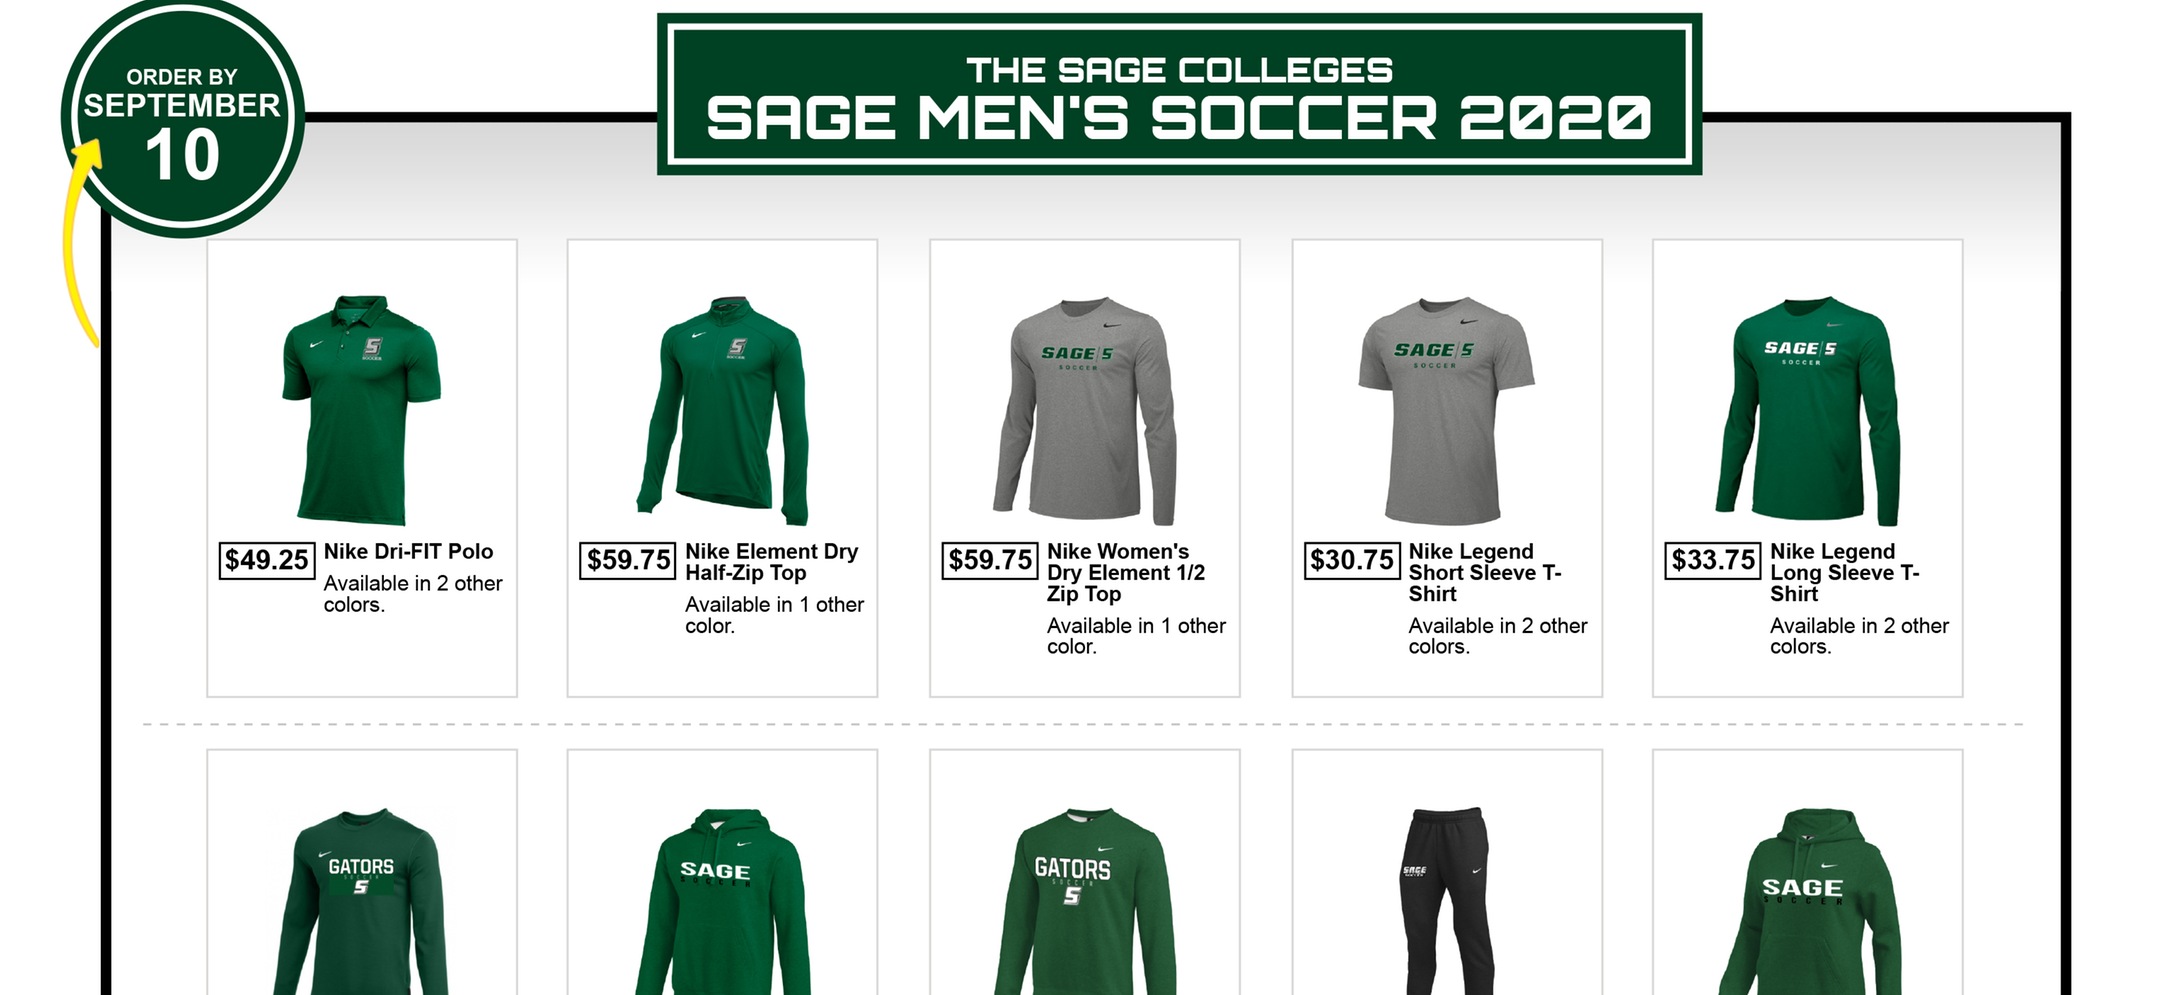 Support Sage's Men's Soccer Program with a purchase from their Team Store!